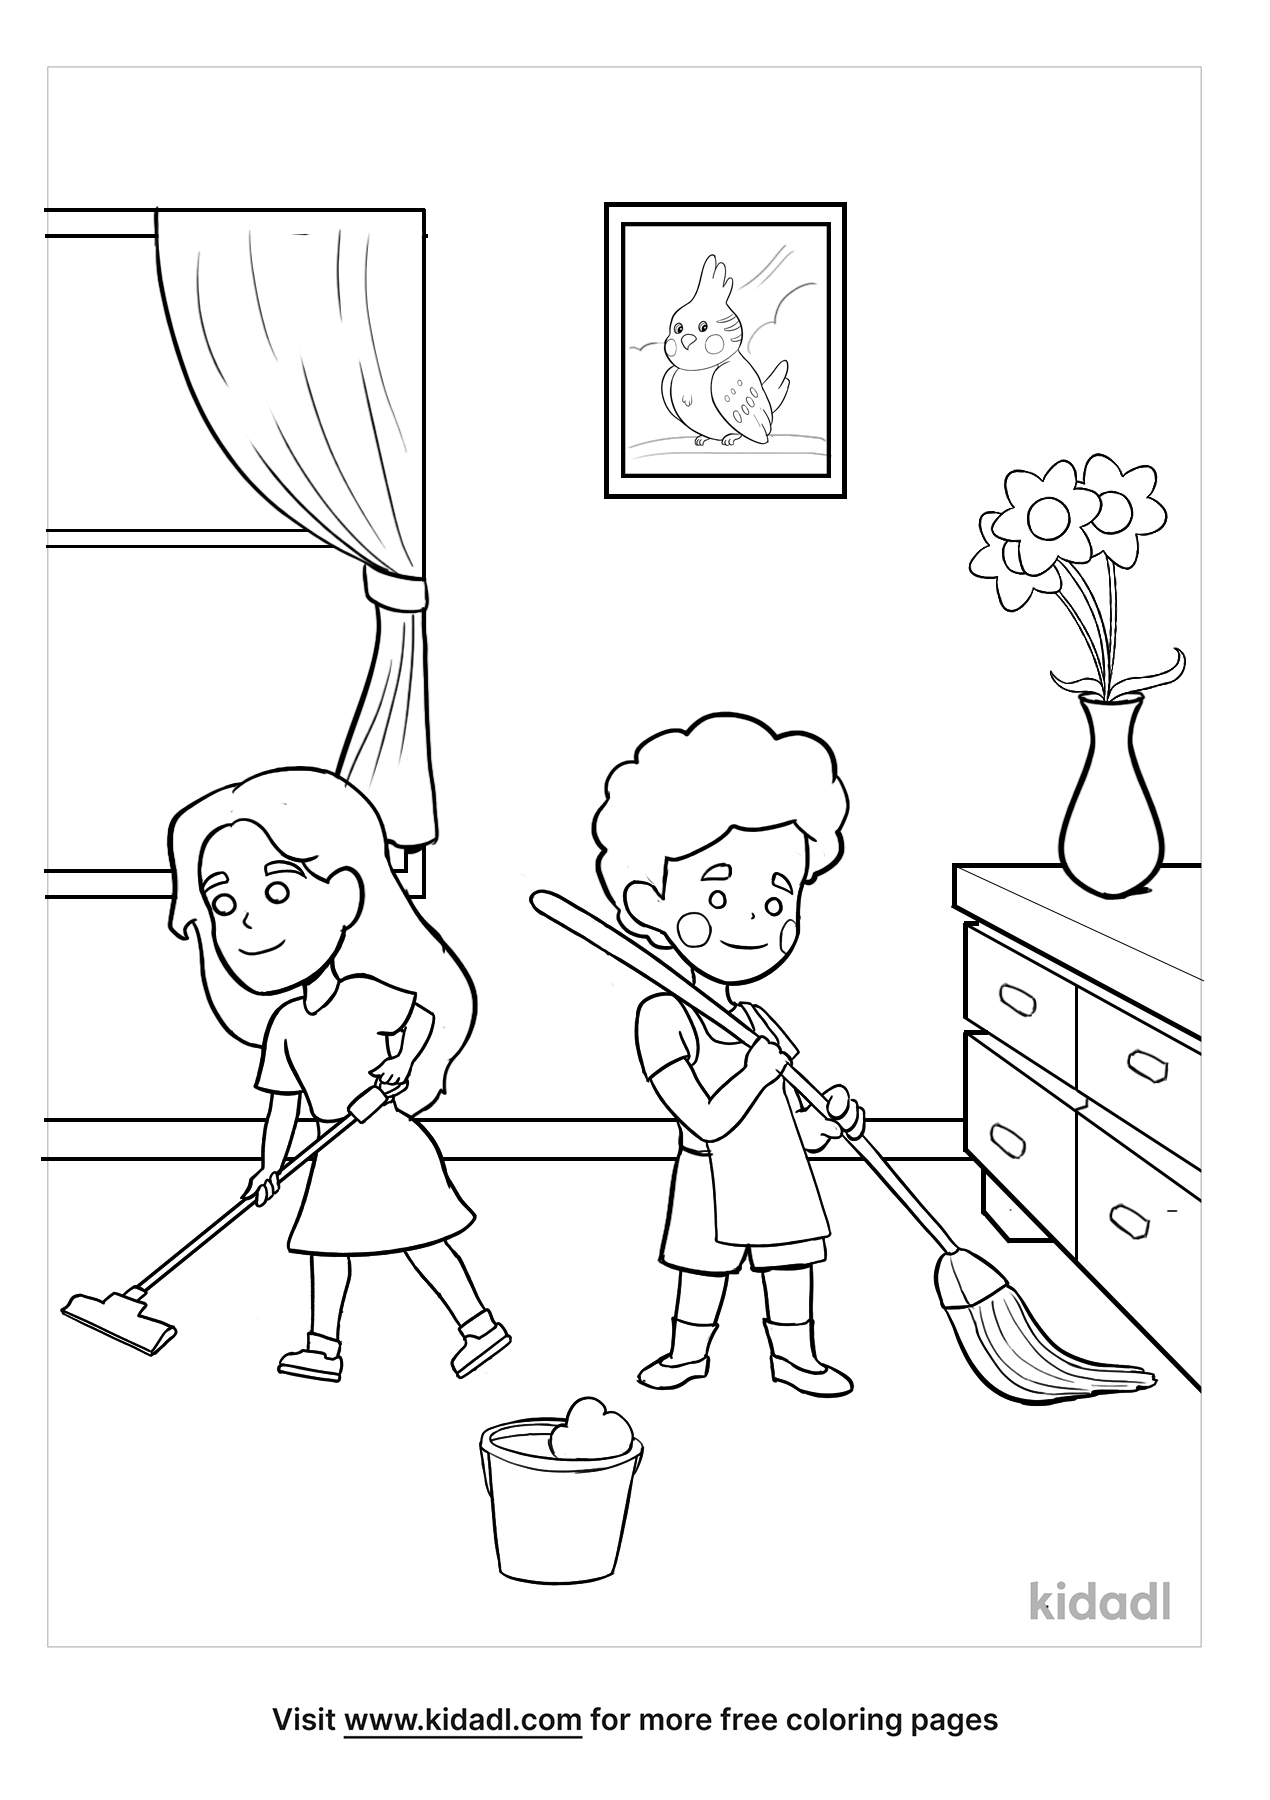 Cleaning Room Coloring Pages Free At Home Coloring Pages